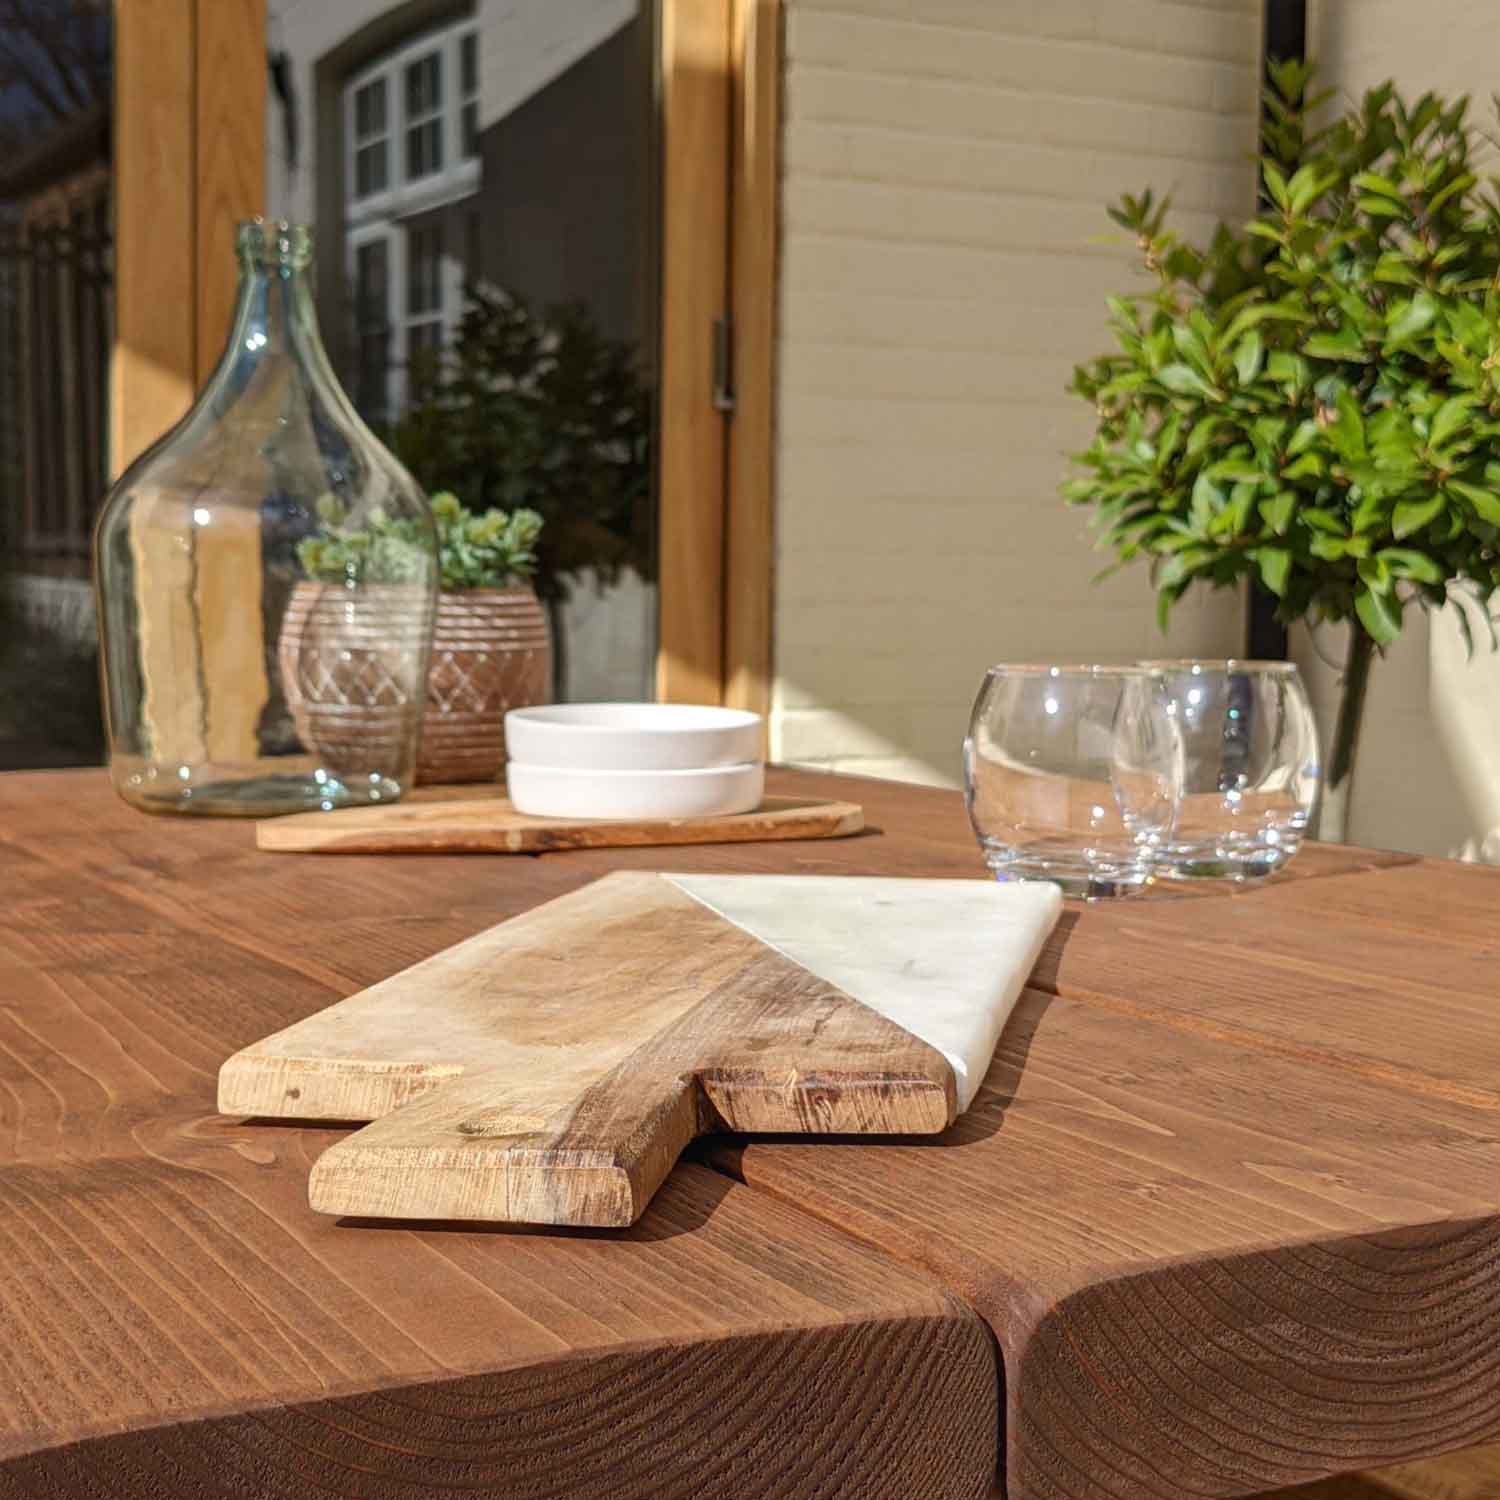 Rustic outdoor dining table set